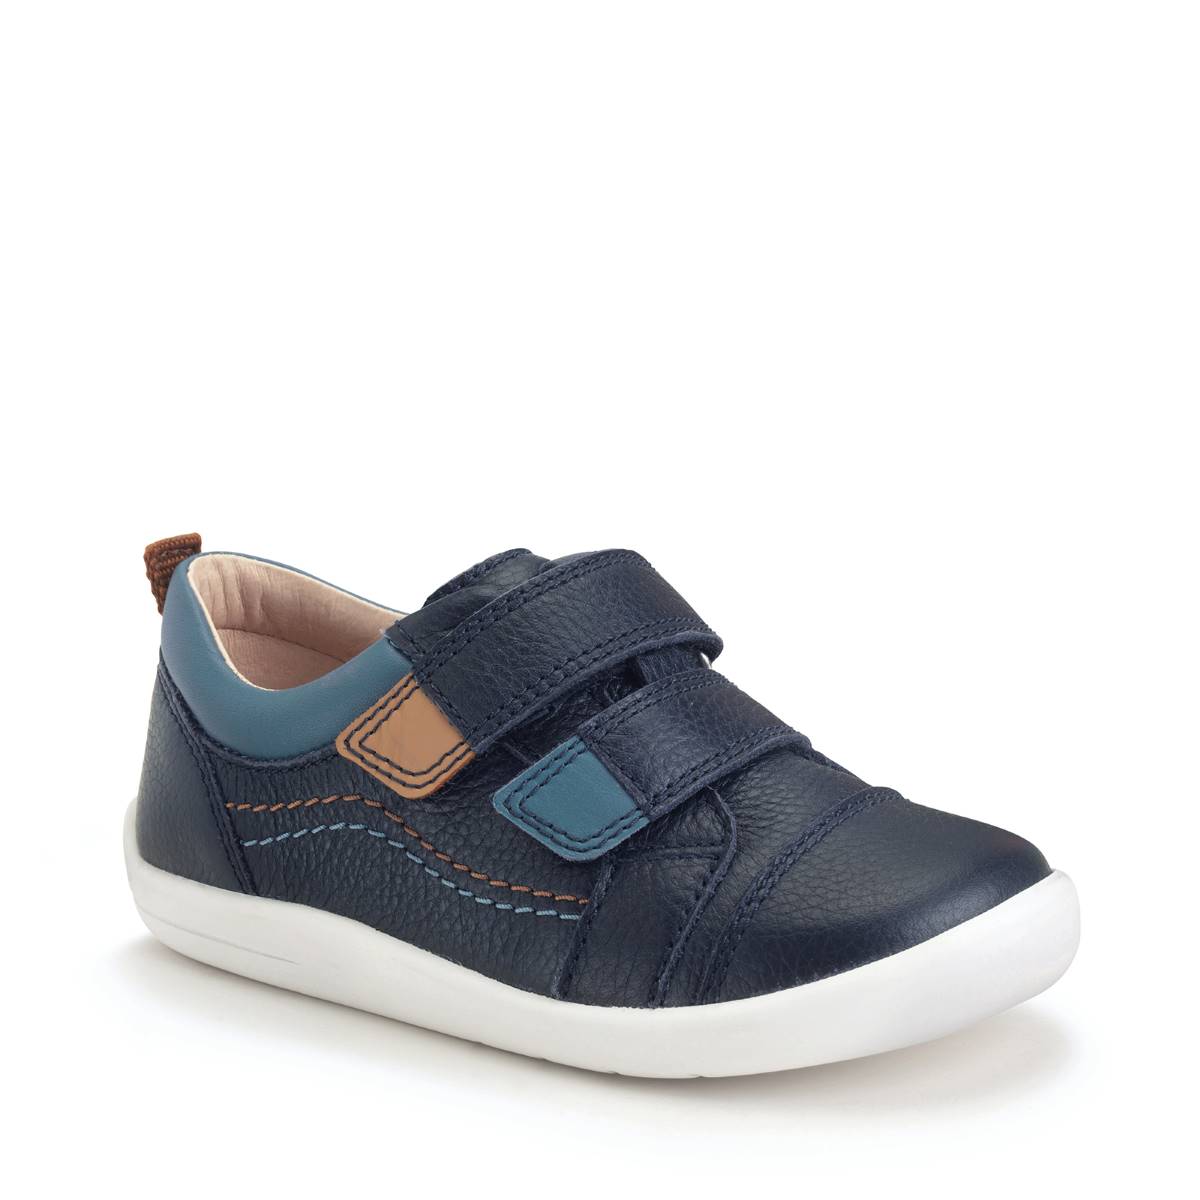 Start Rite Playhouse Clubhouse Navy leather Kids Boys Toddler Shoes 0826-97G in a Plain Leather in Size 4